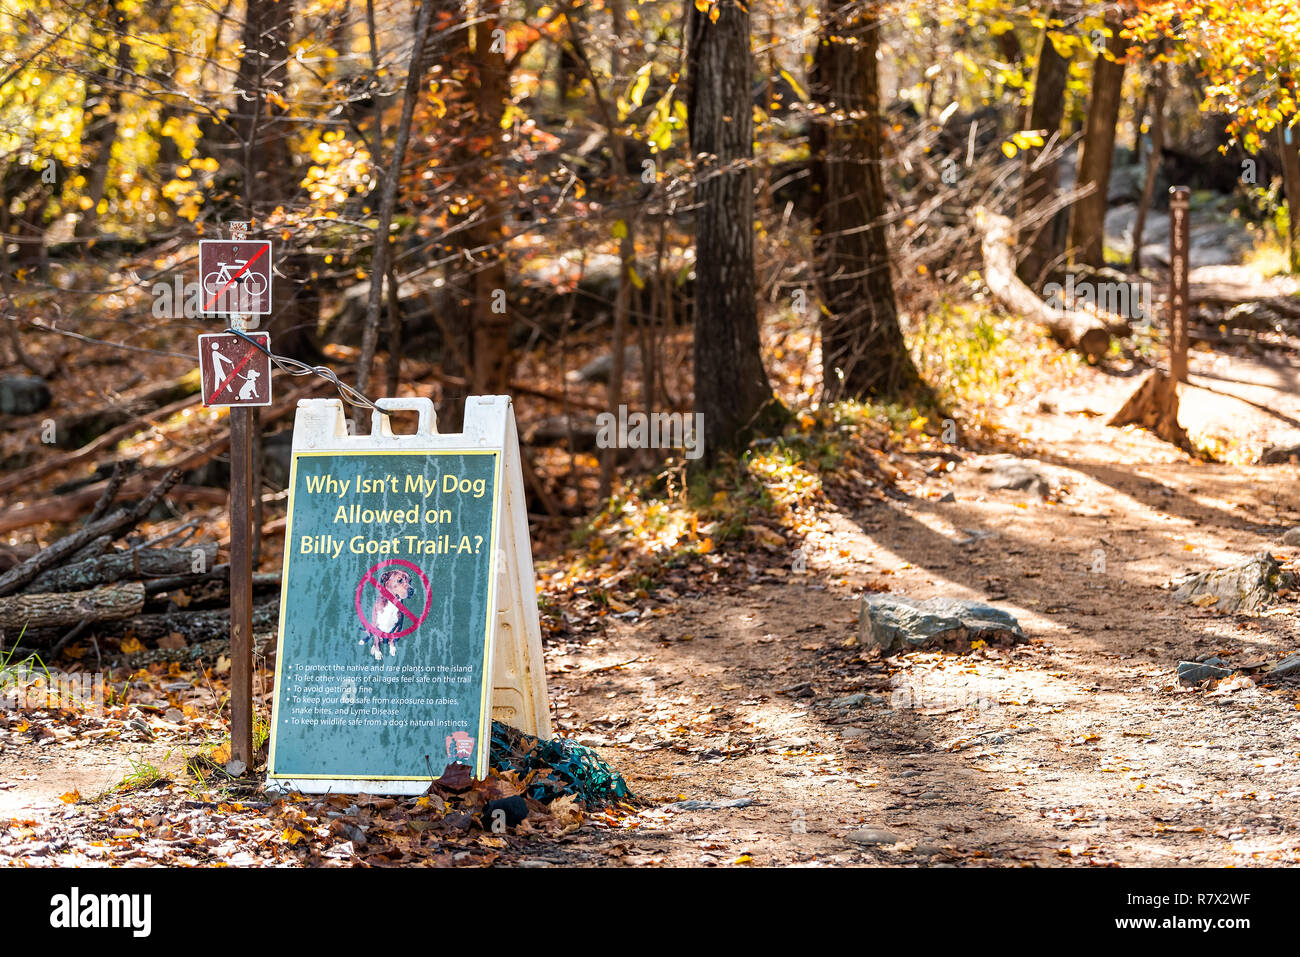 Great Falls, USA - October 31, 2018: Autumn landscape in Maryland, colorful yellow orange leaves foliage and sign for famous Billy Goat Trail Stock Photo